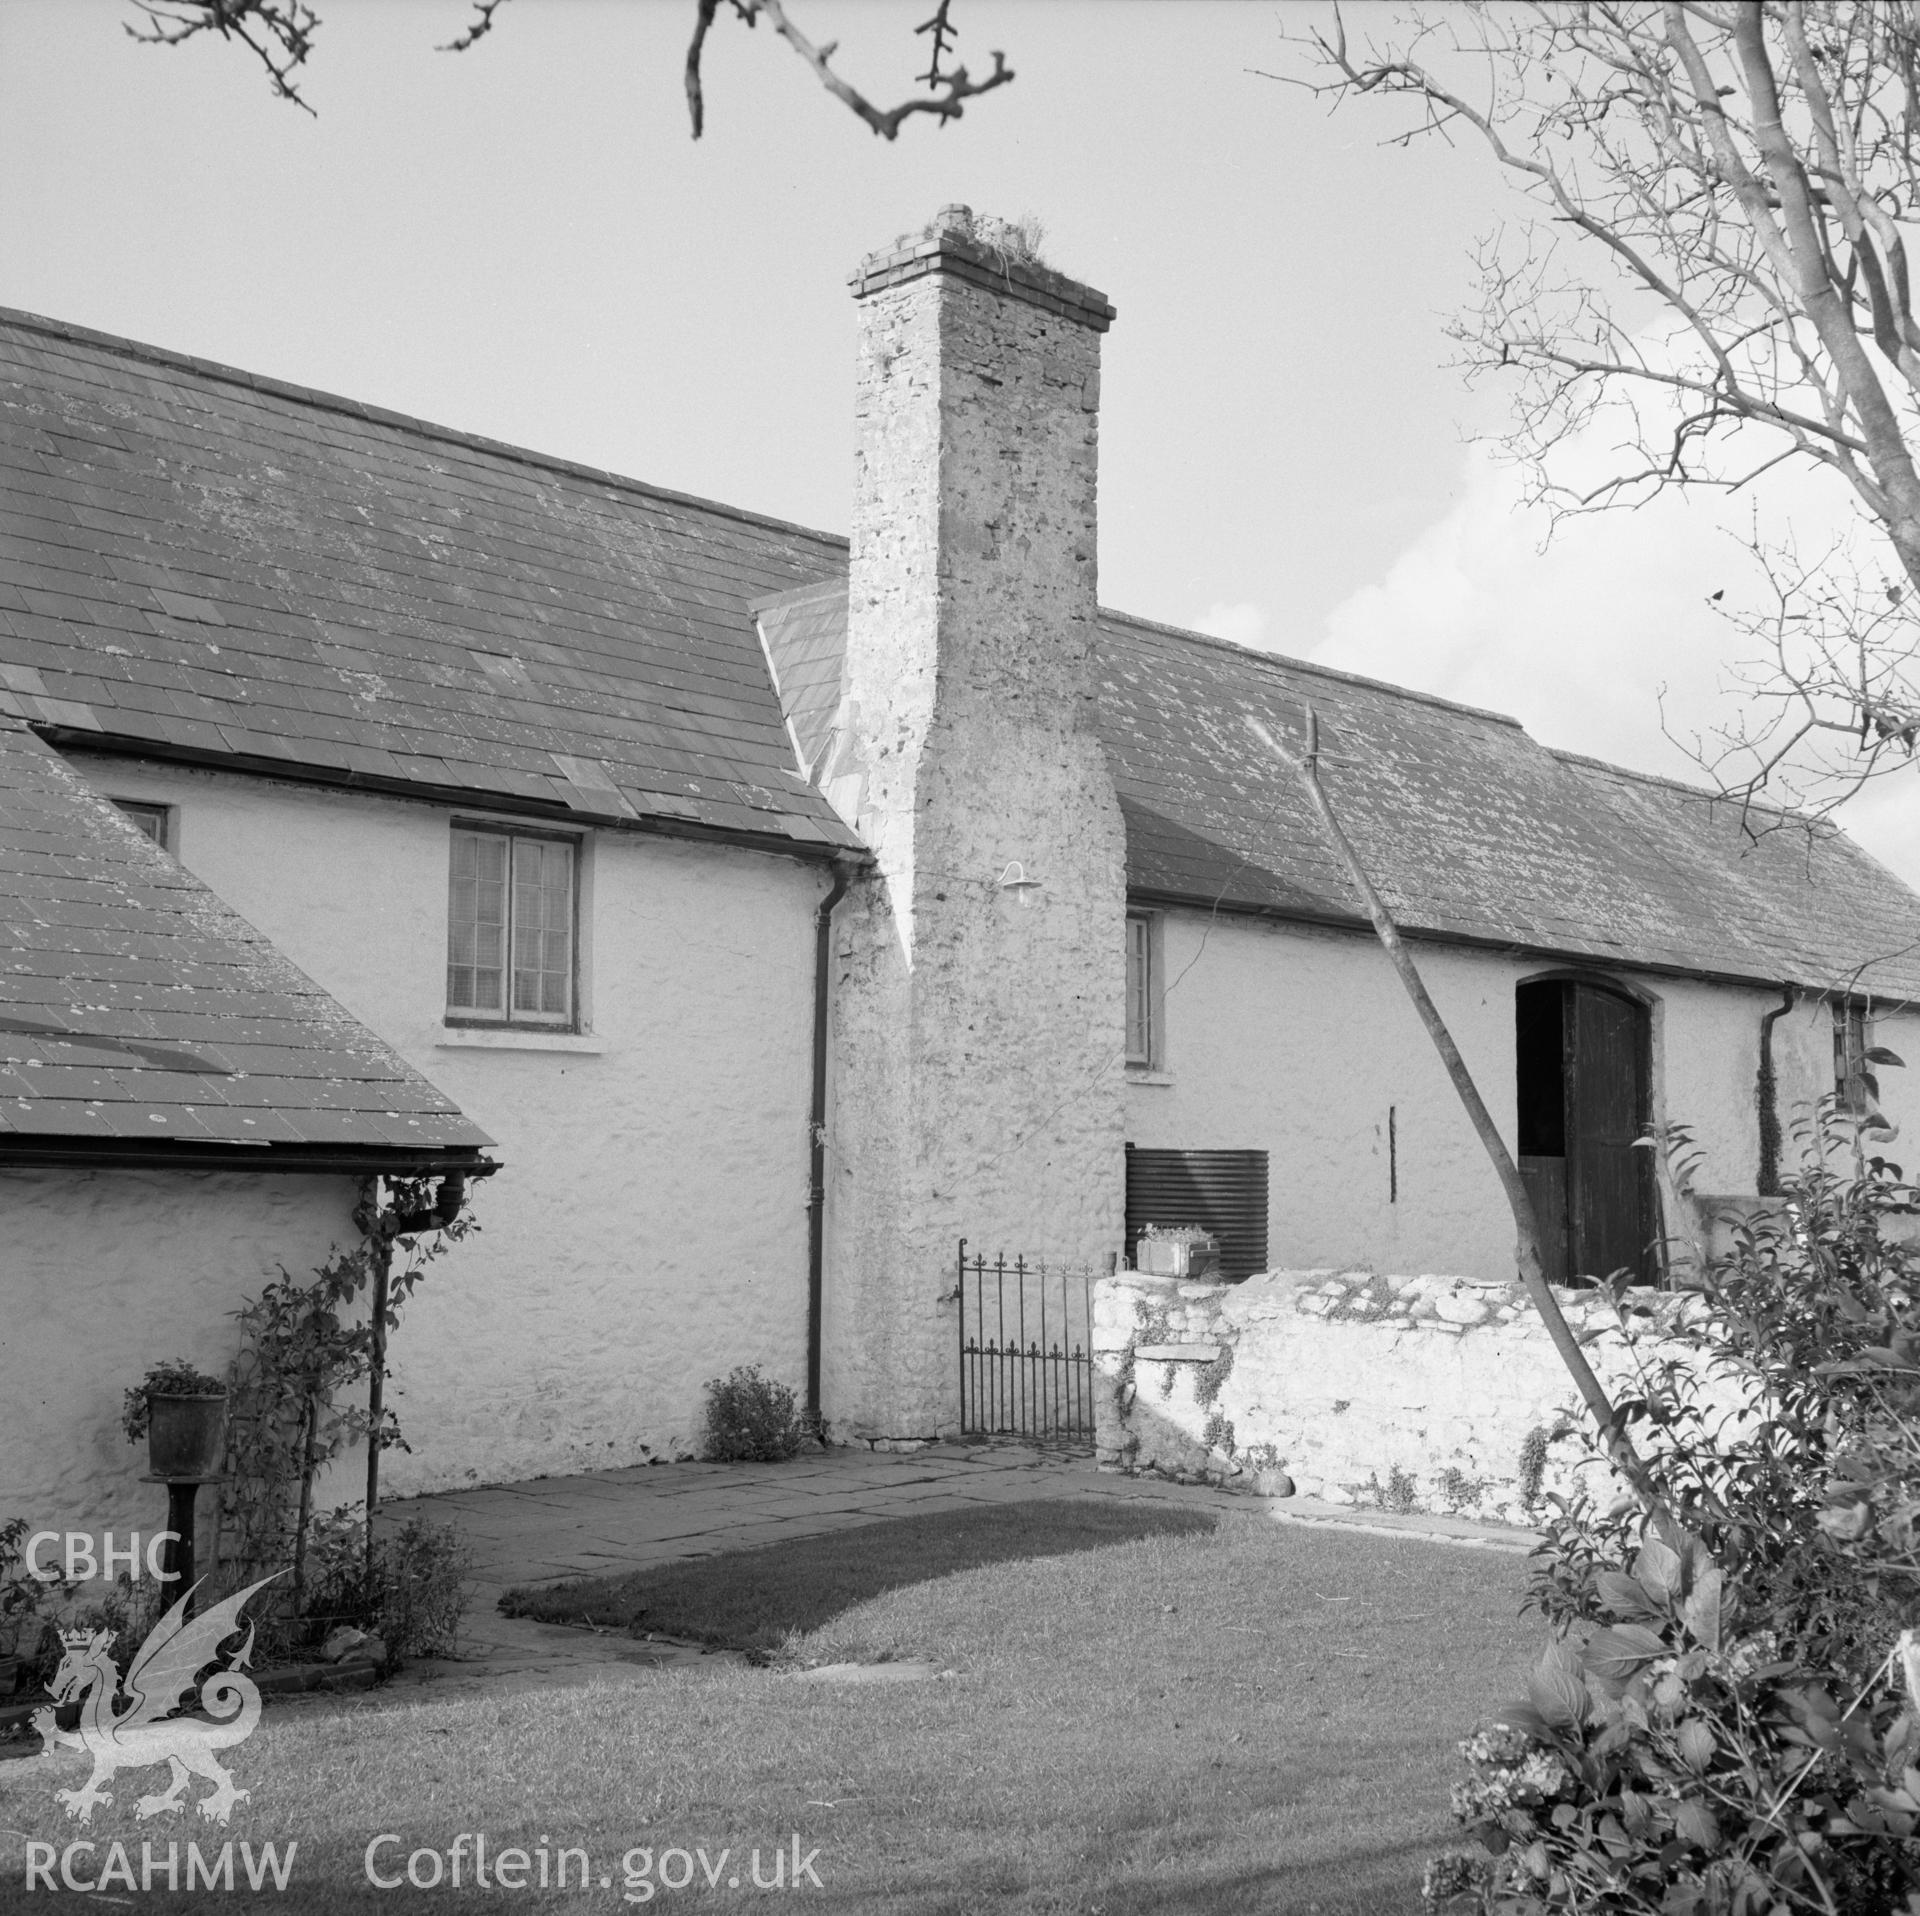 Digital copy of a black and white negative showing Garwa, St Mary Hill, taken 28th November 1965.